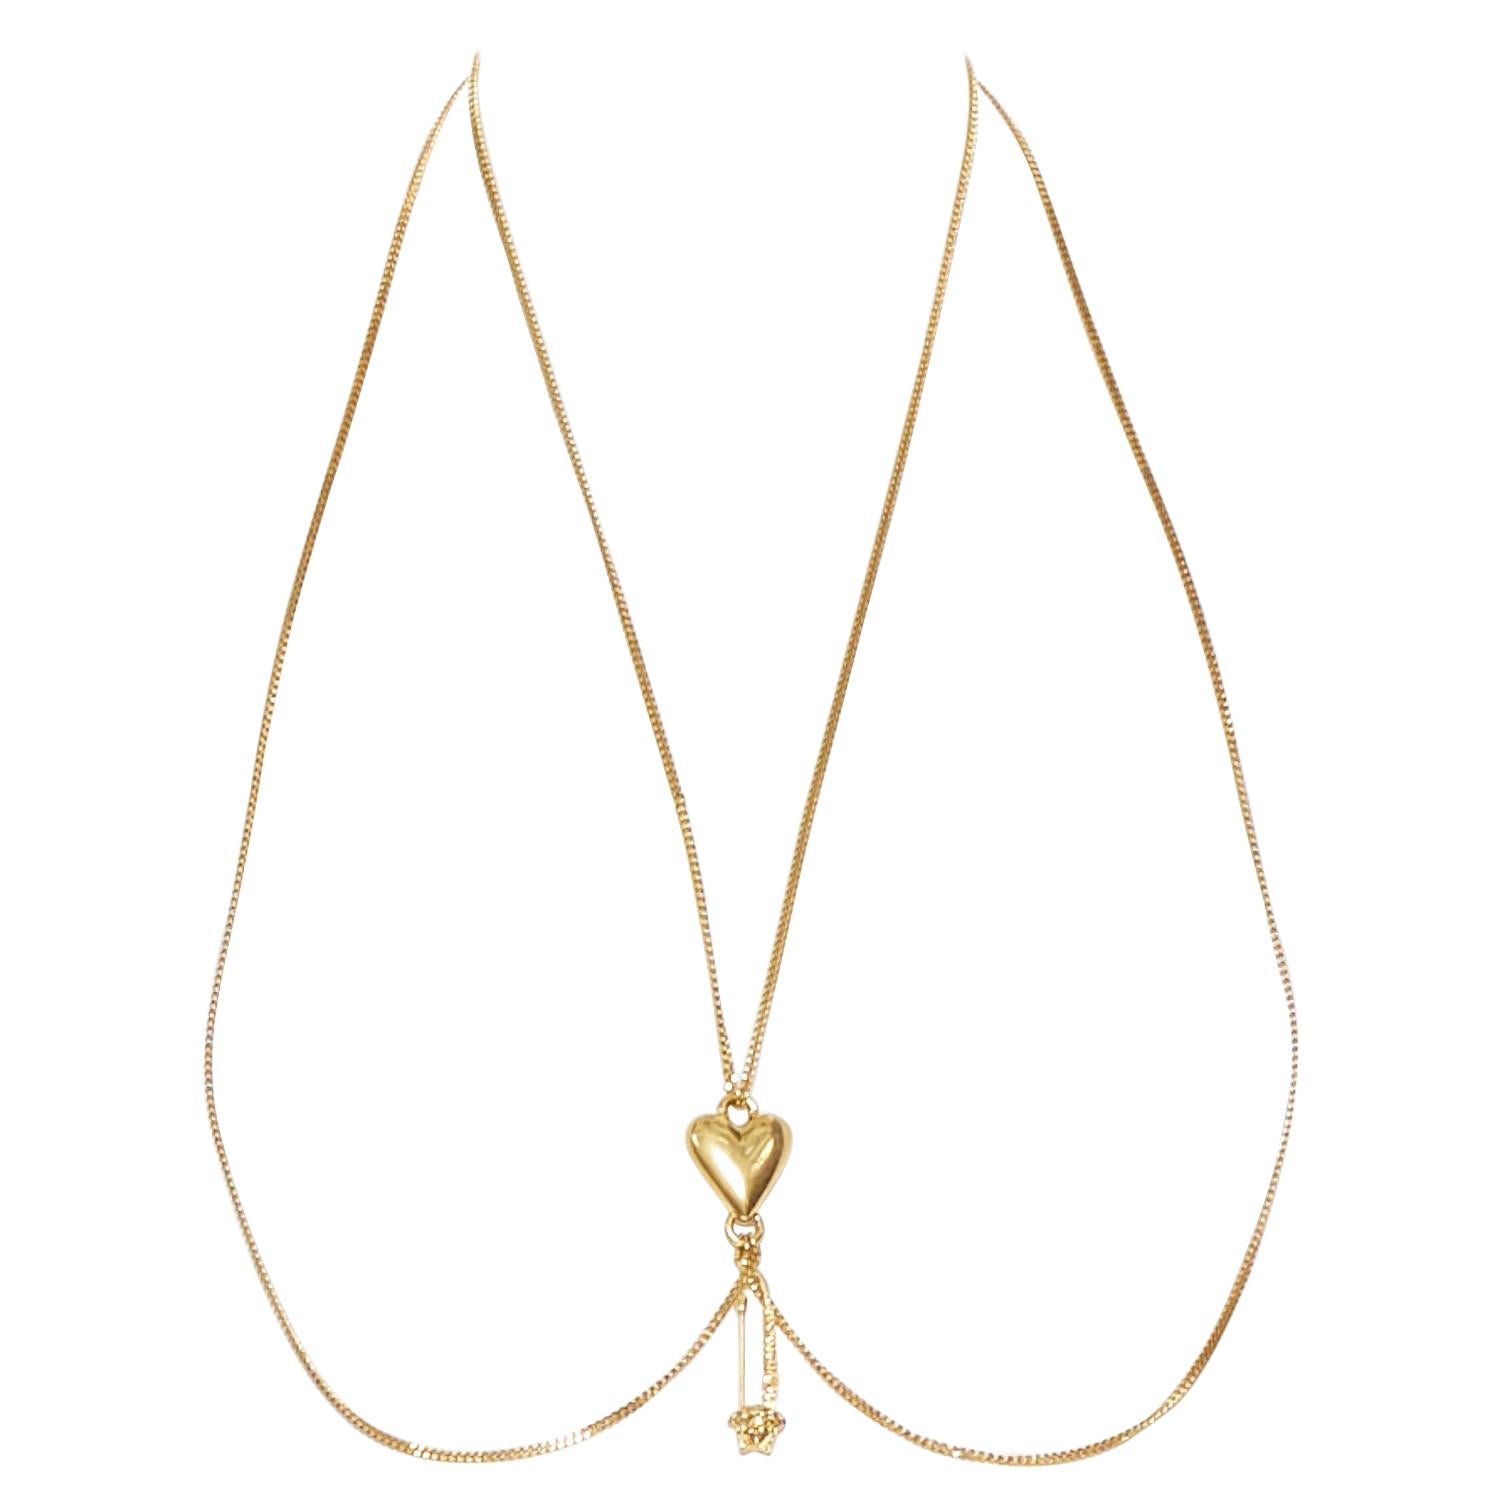 new VERSACE Love Heart Signature Safety Pin Medusa gold-tone bodychain necklace